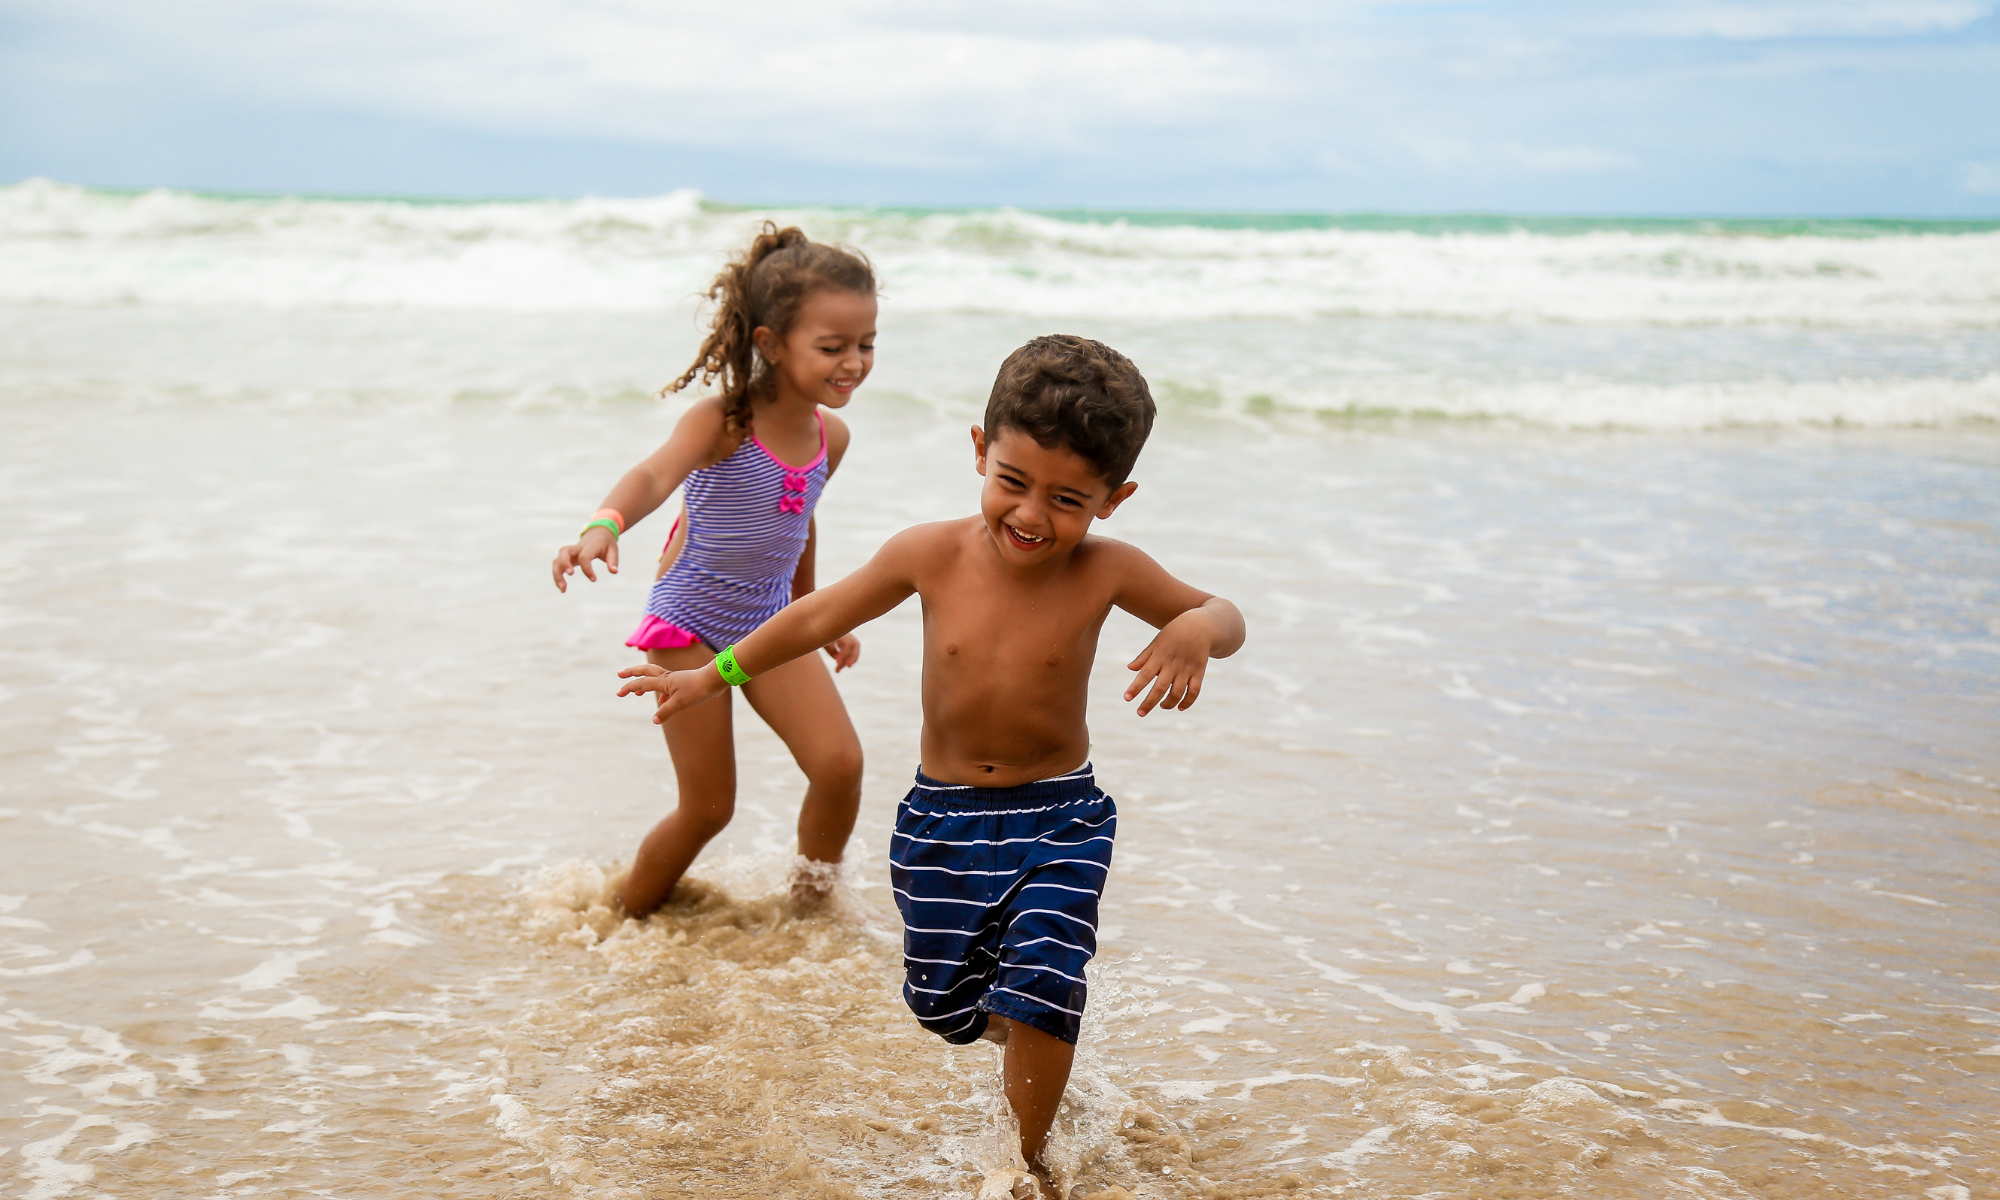 capturing your kid's summer activities photo of two kids running on the beach